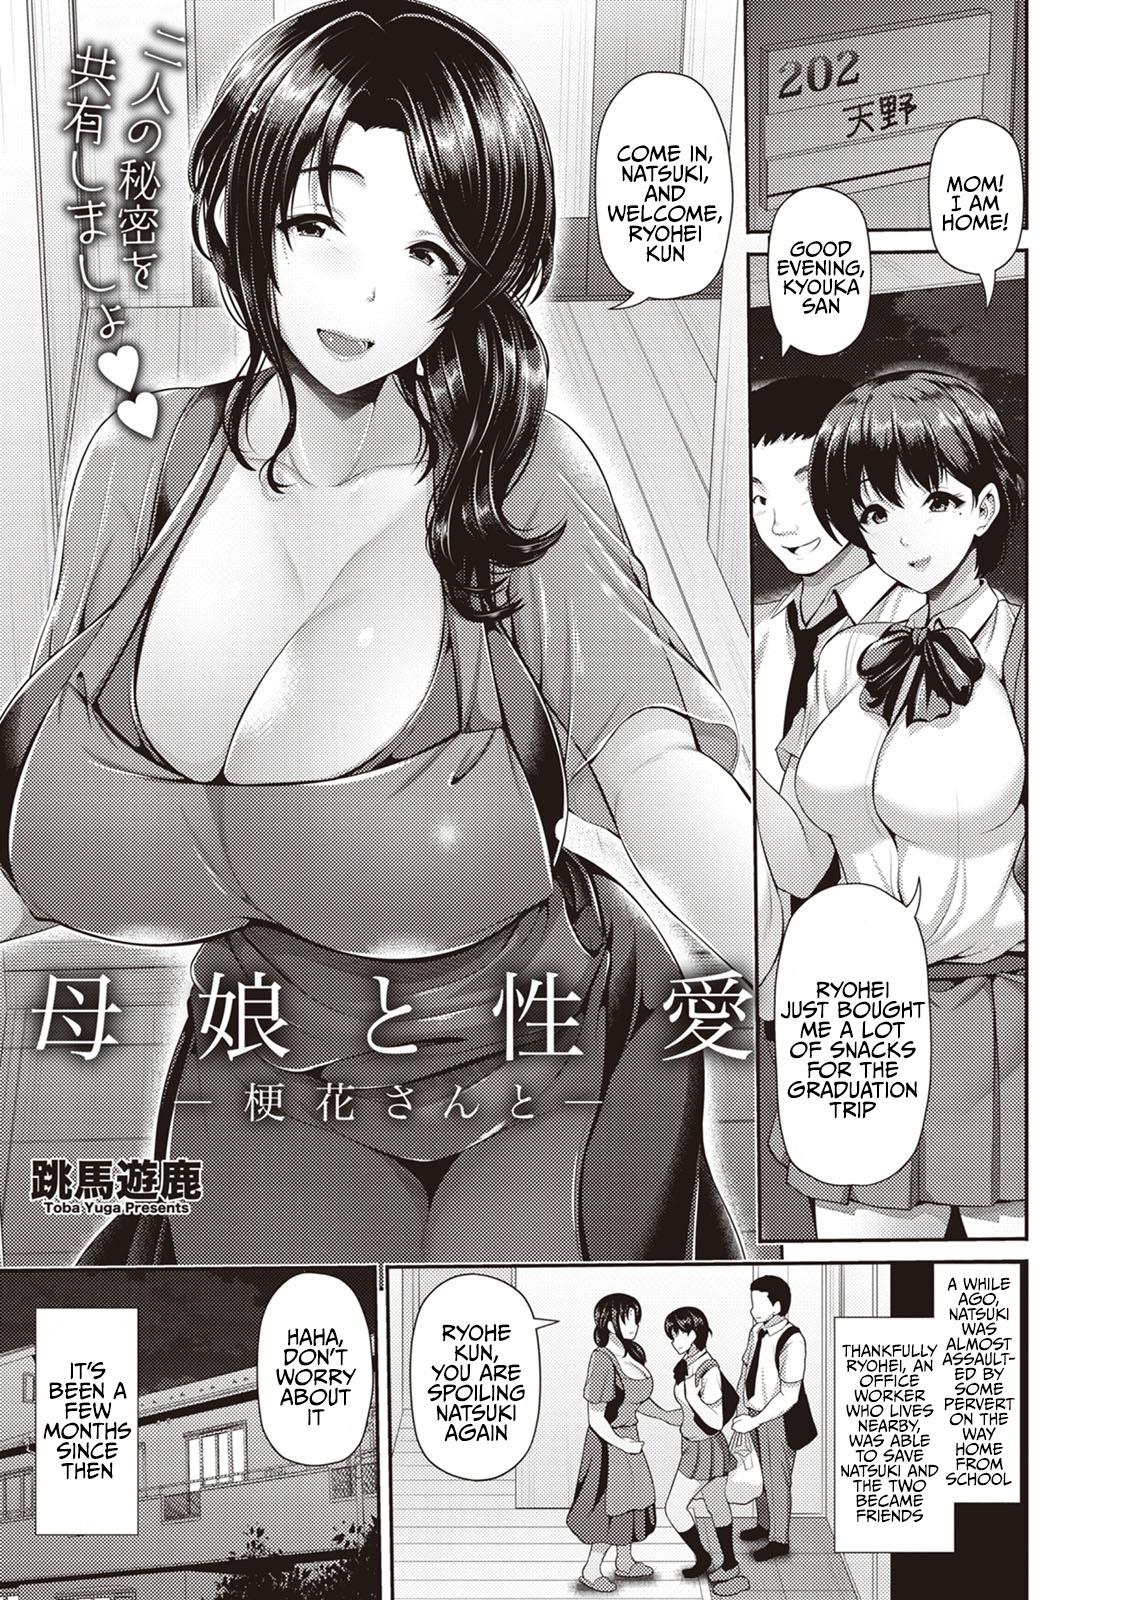 Butt Oyako to Seiai | Sexual Relations with Mother and Daughter ~ Kyouka San Les - Page 2